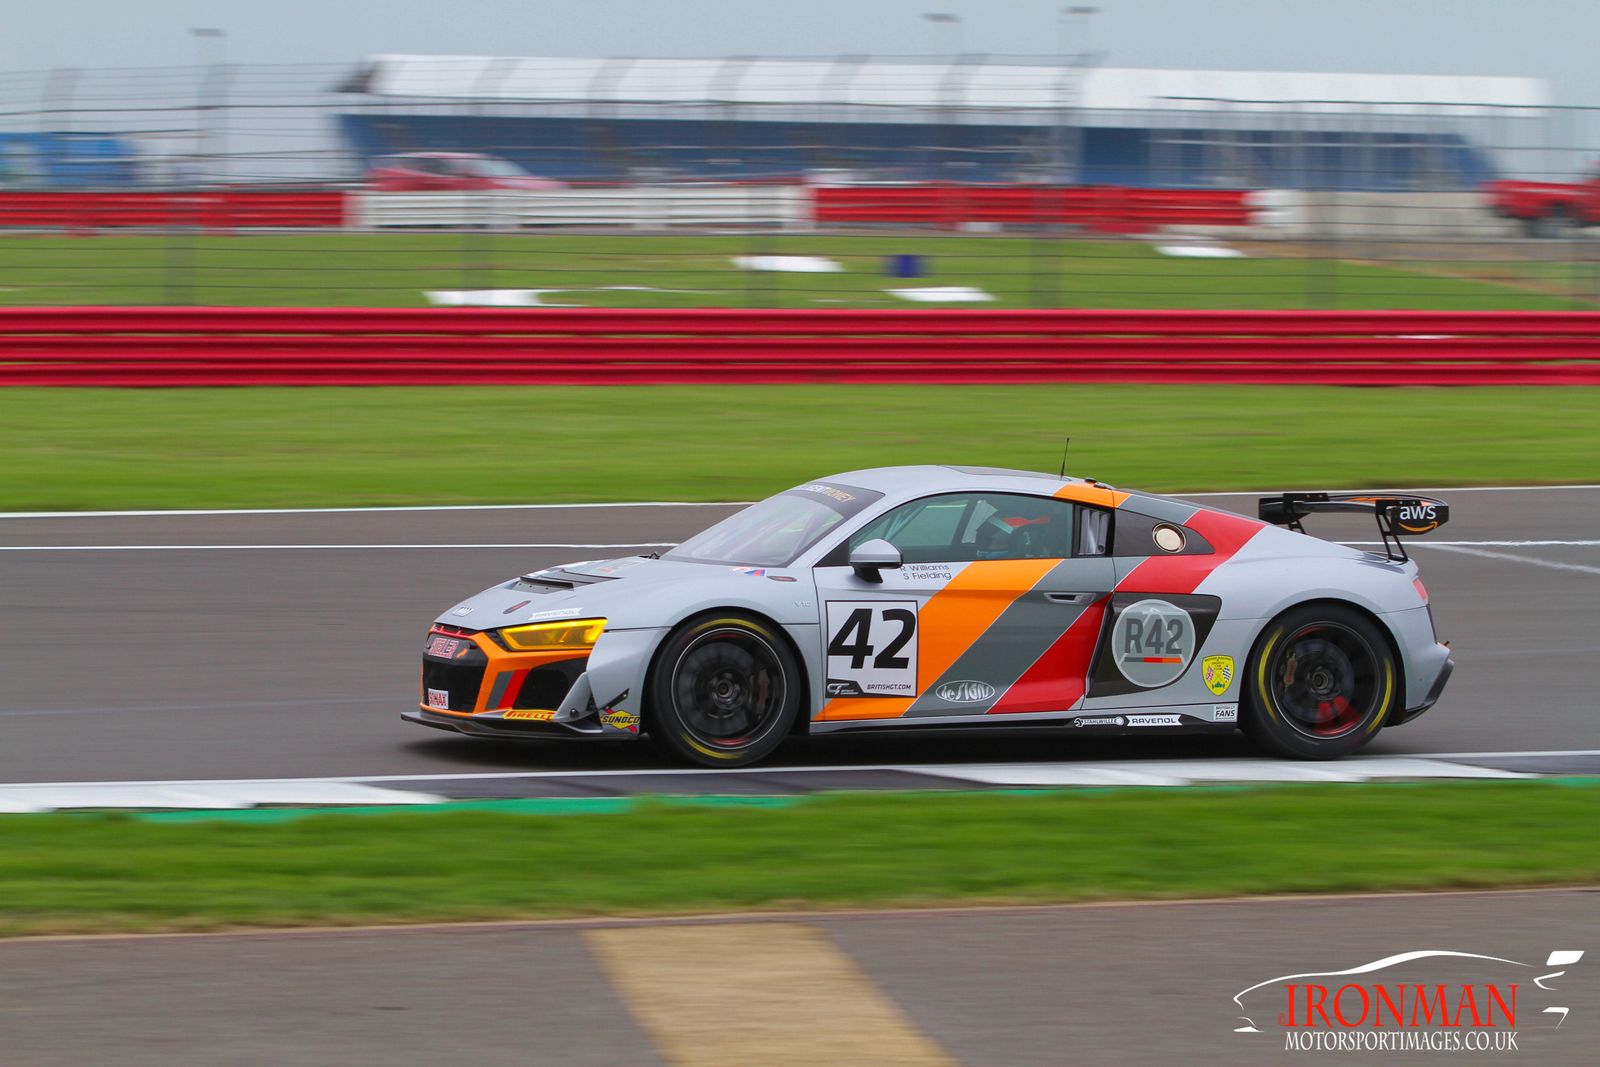 2 SEAS MOTORSPORT win from Pole on their British GT comeback !!